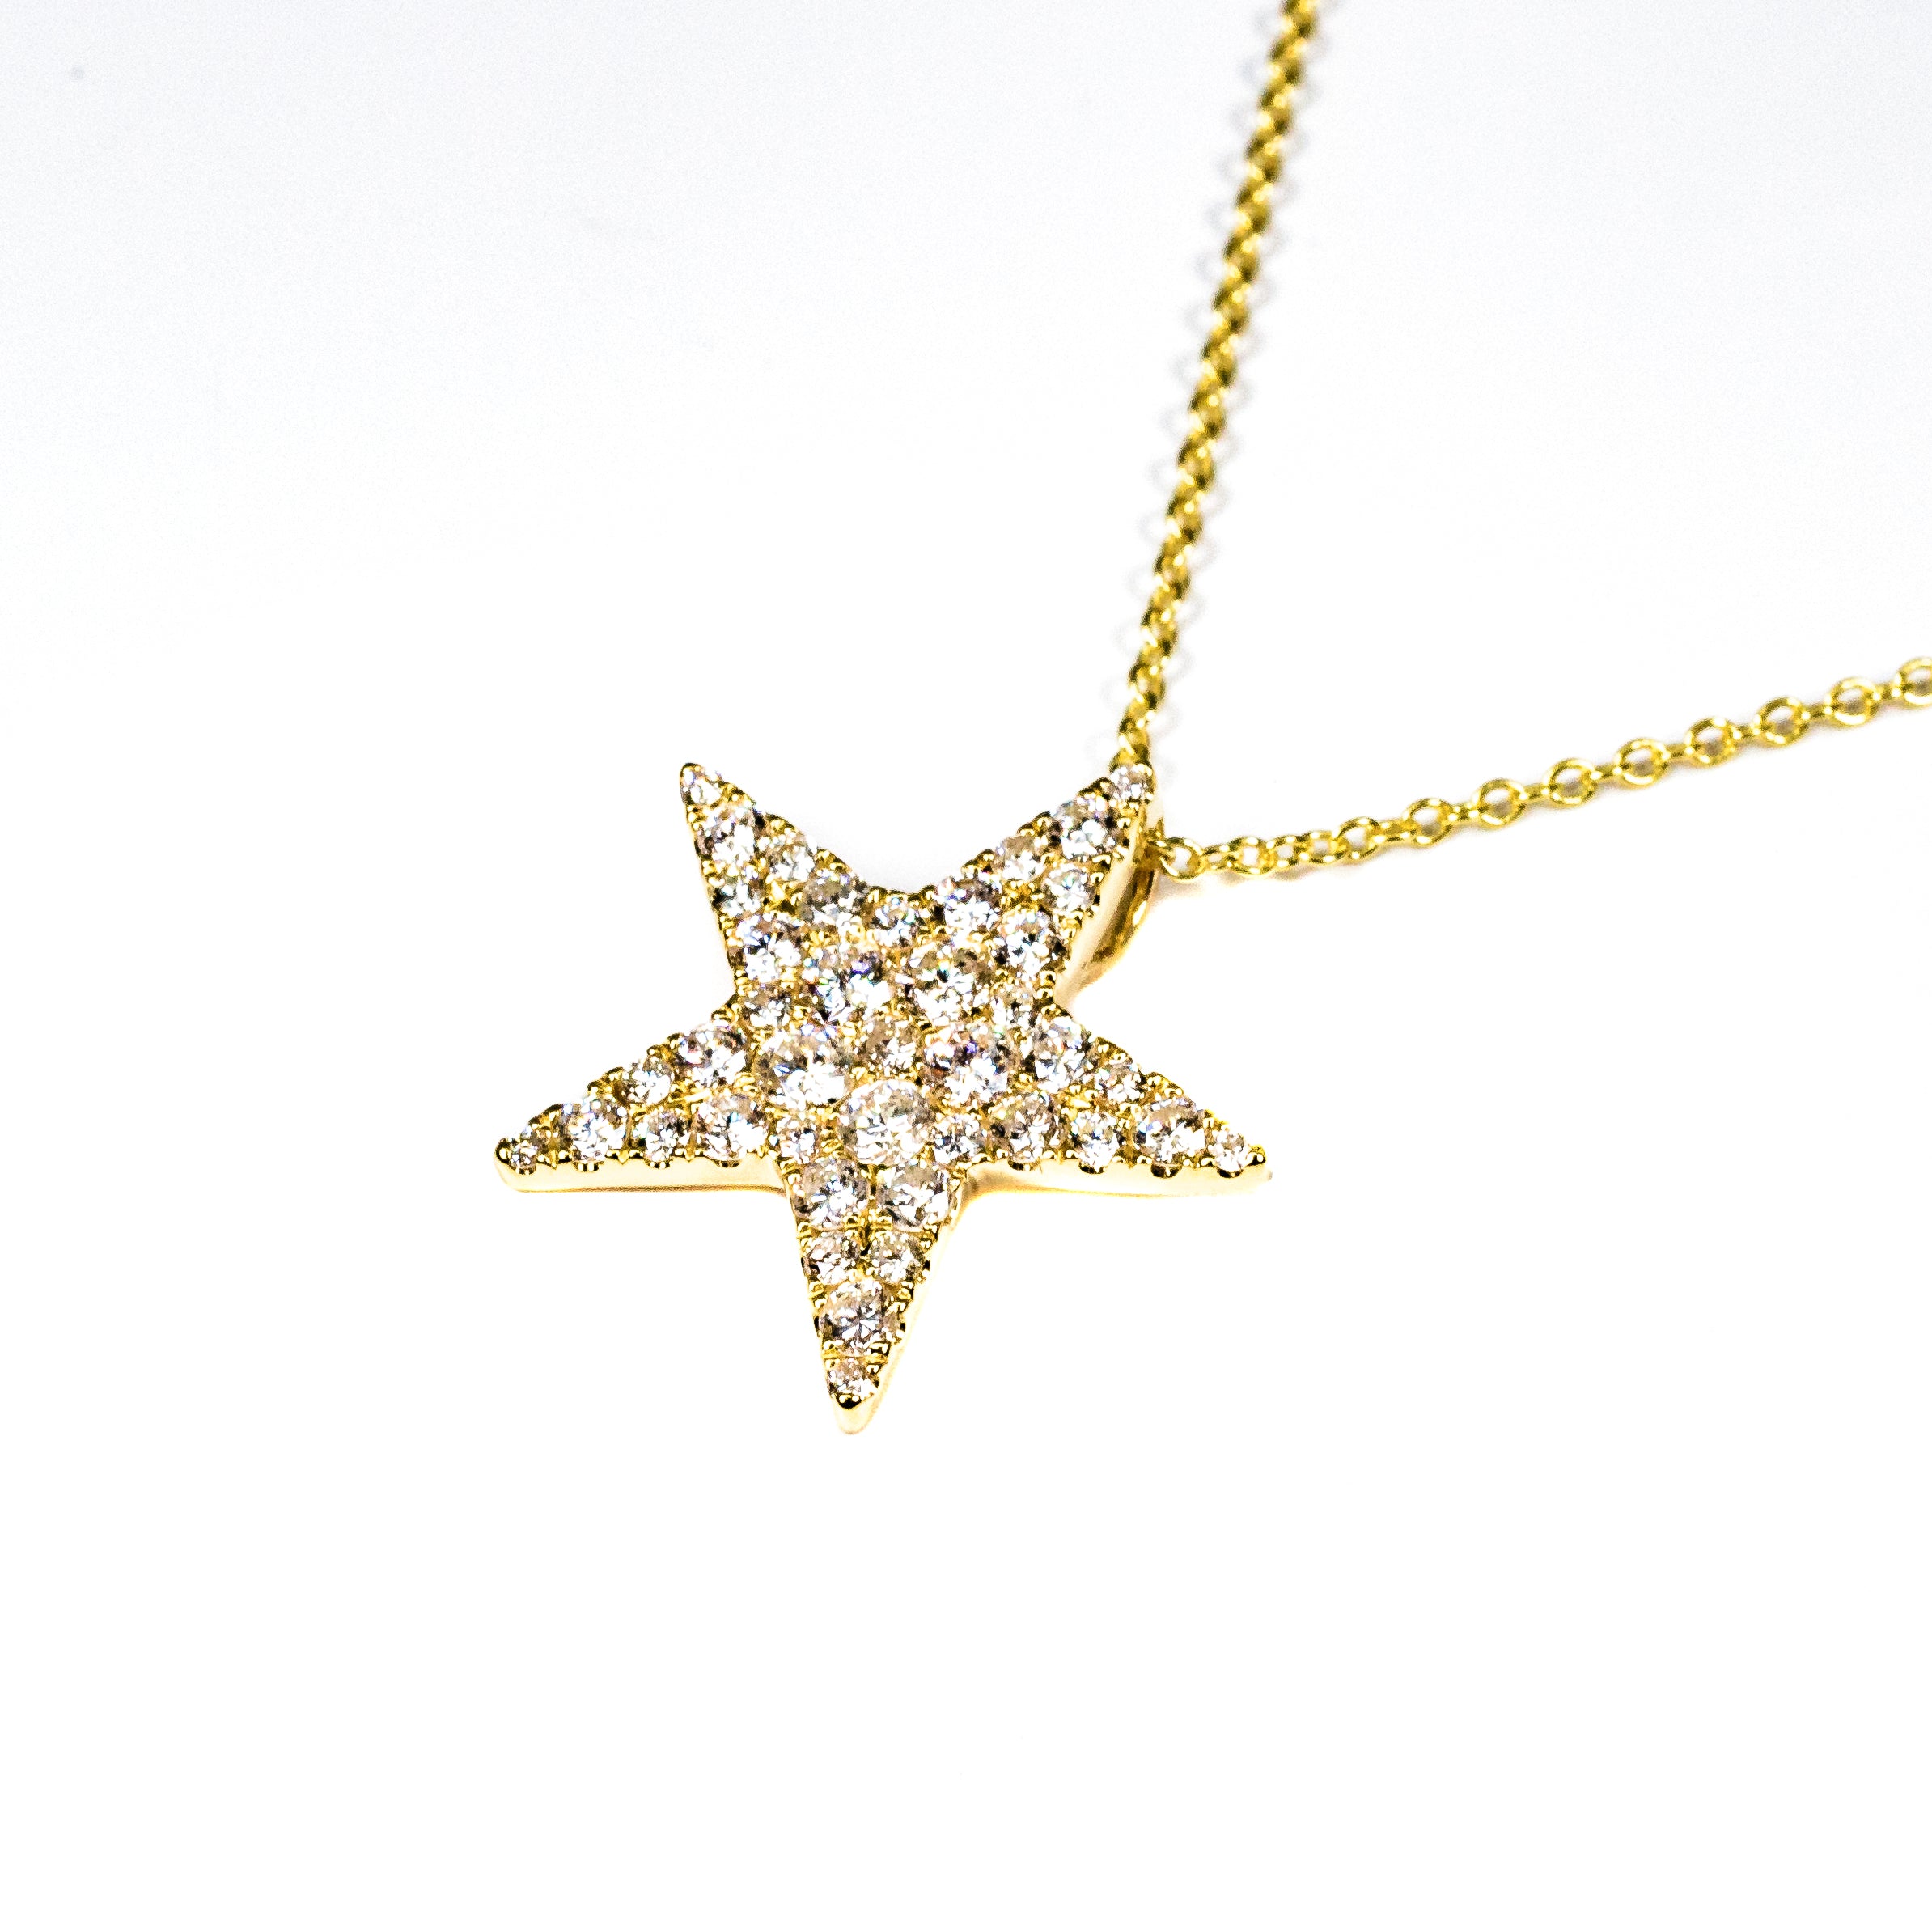 18kt Yellow Gold Diamond Star 18" Necklace